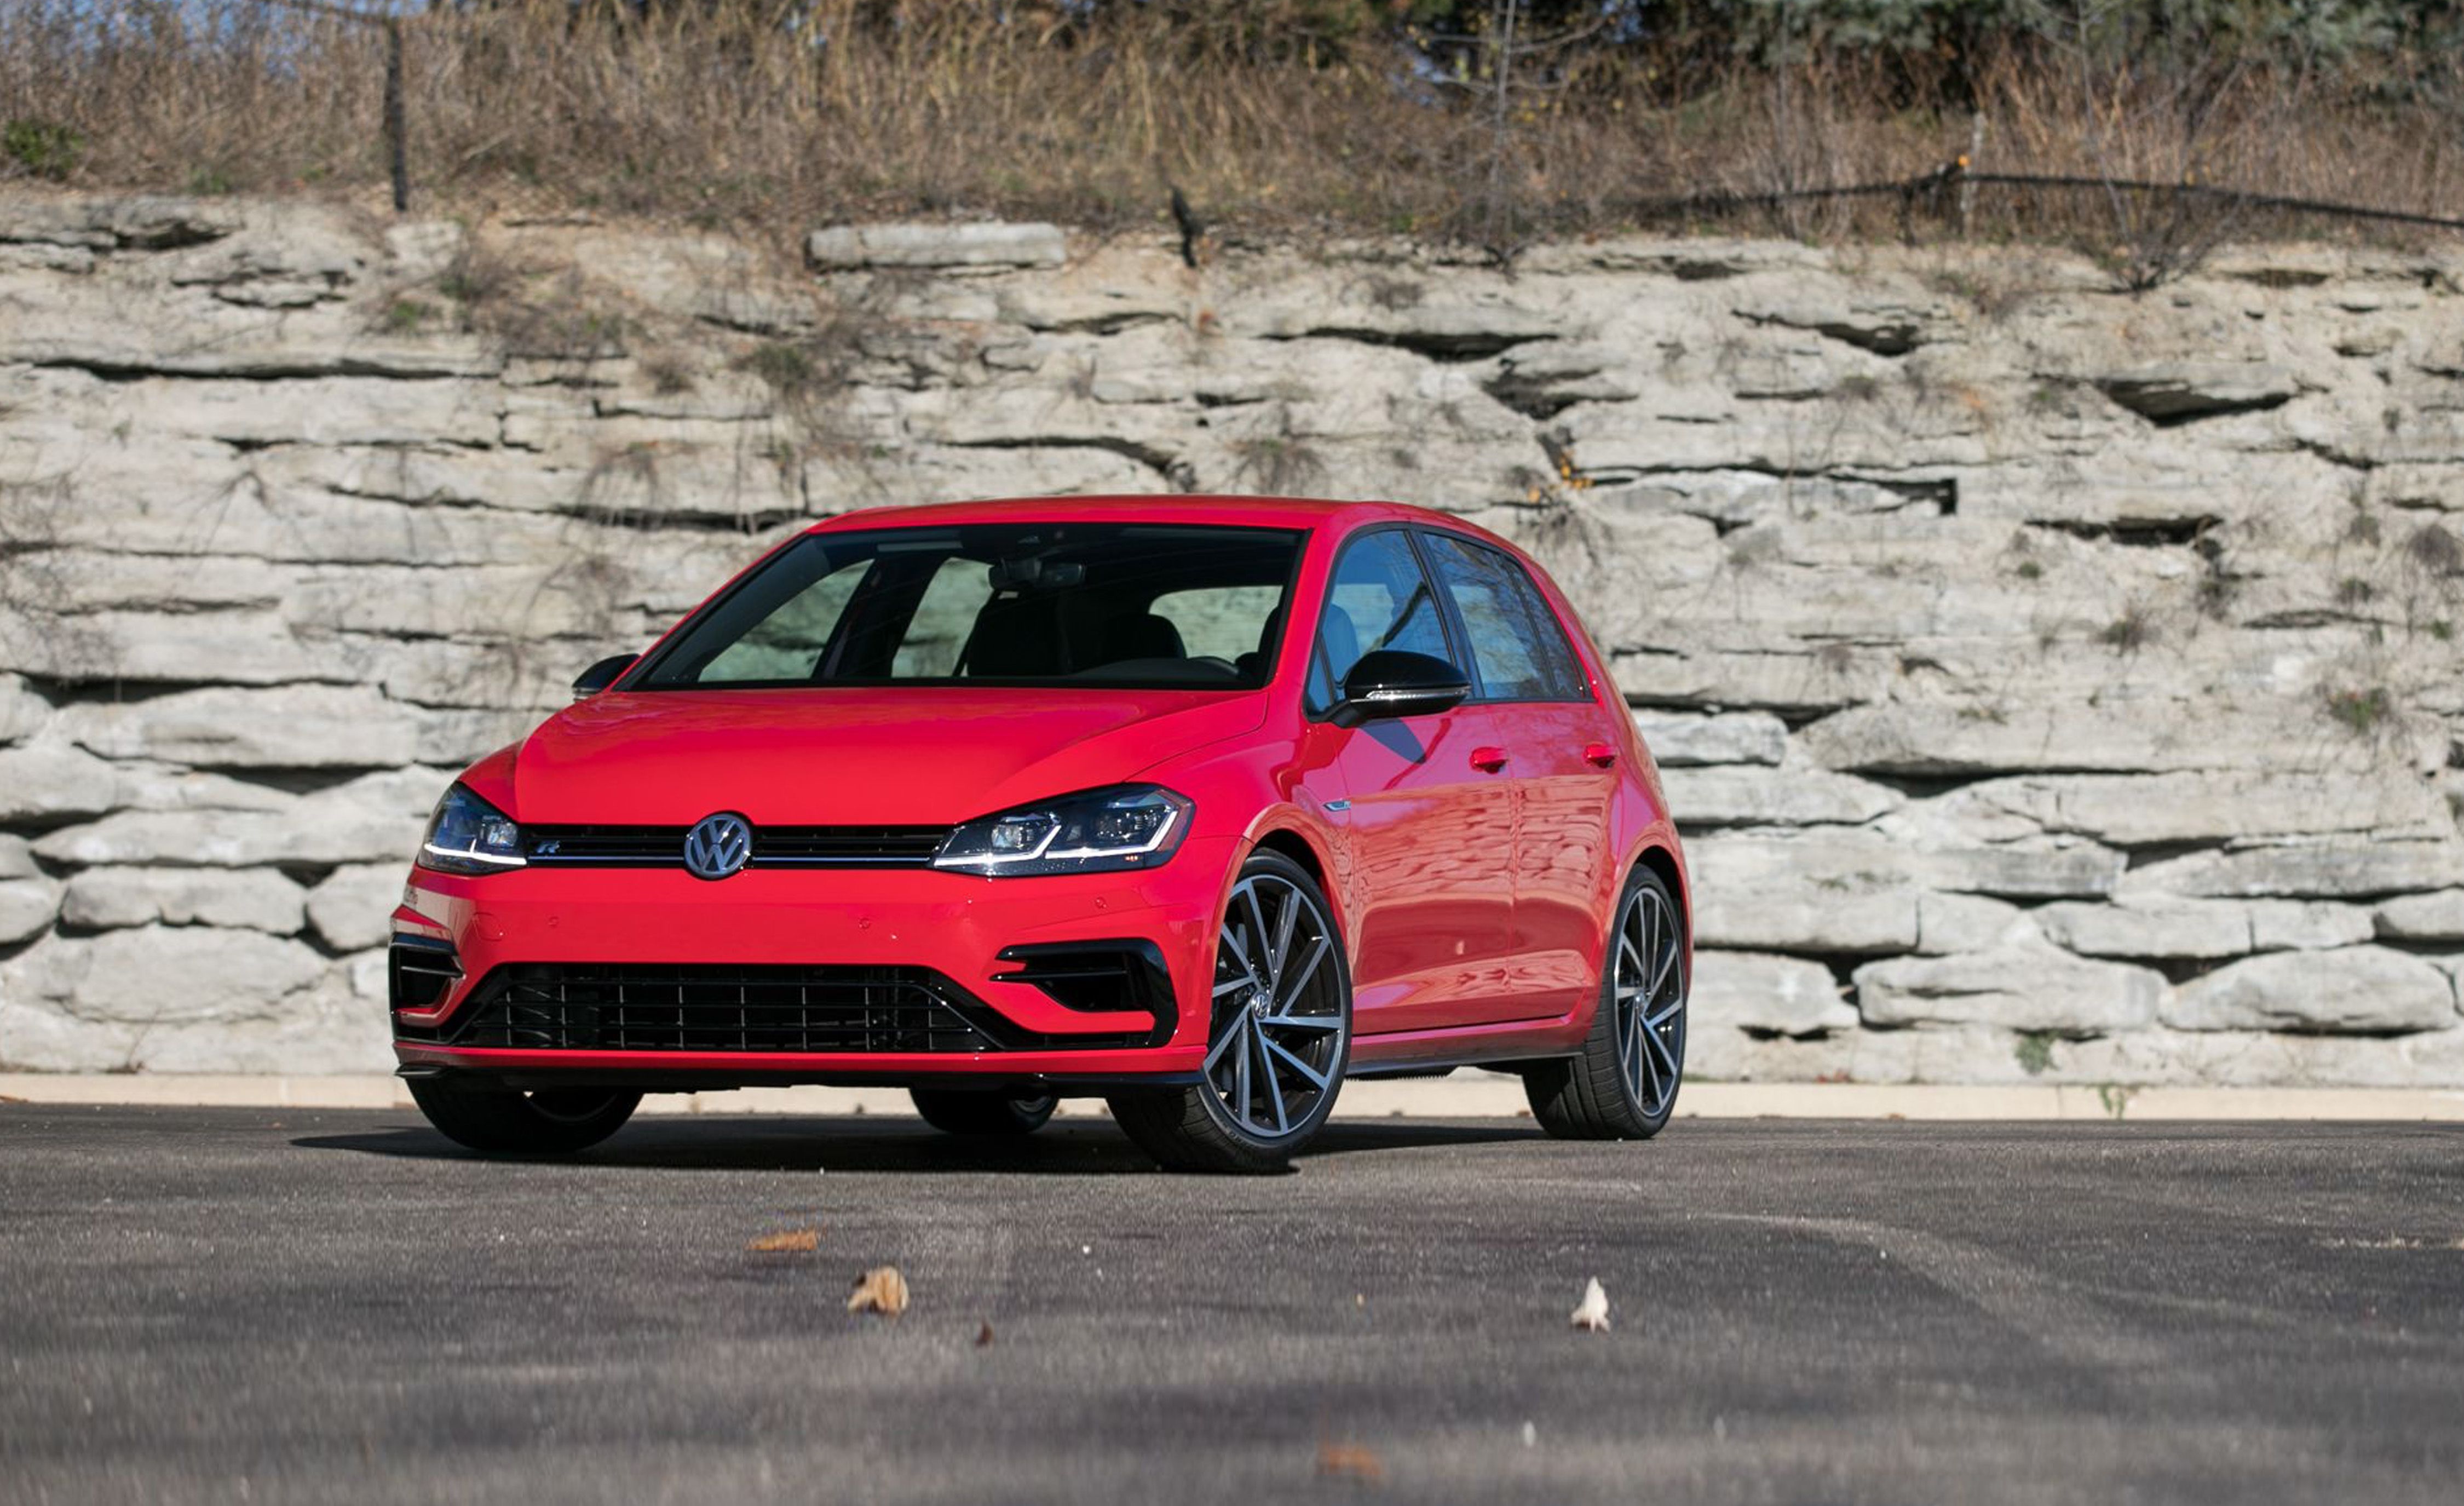 2019 Volkswagen Golf R Review, Pricing, and Specs